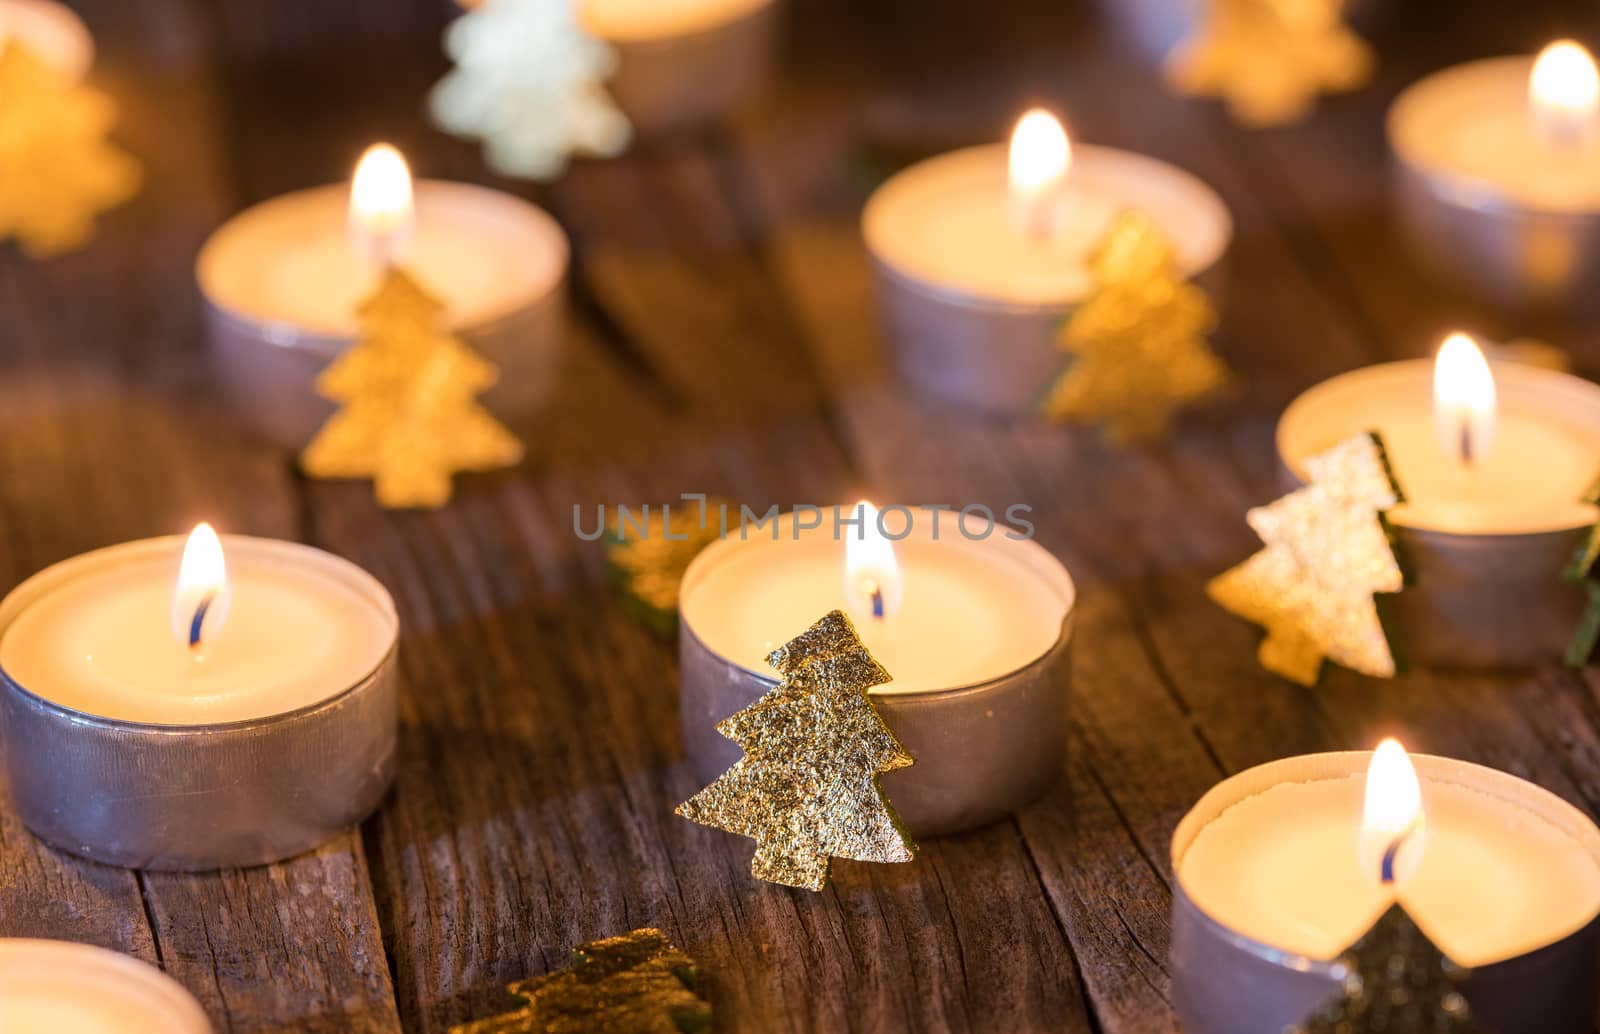 Festive candlelight with christmas decoration on wooden table, close-up